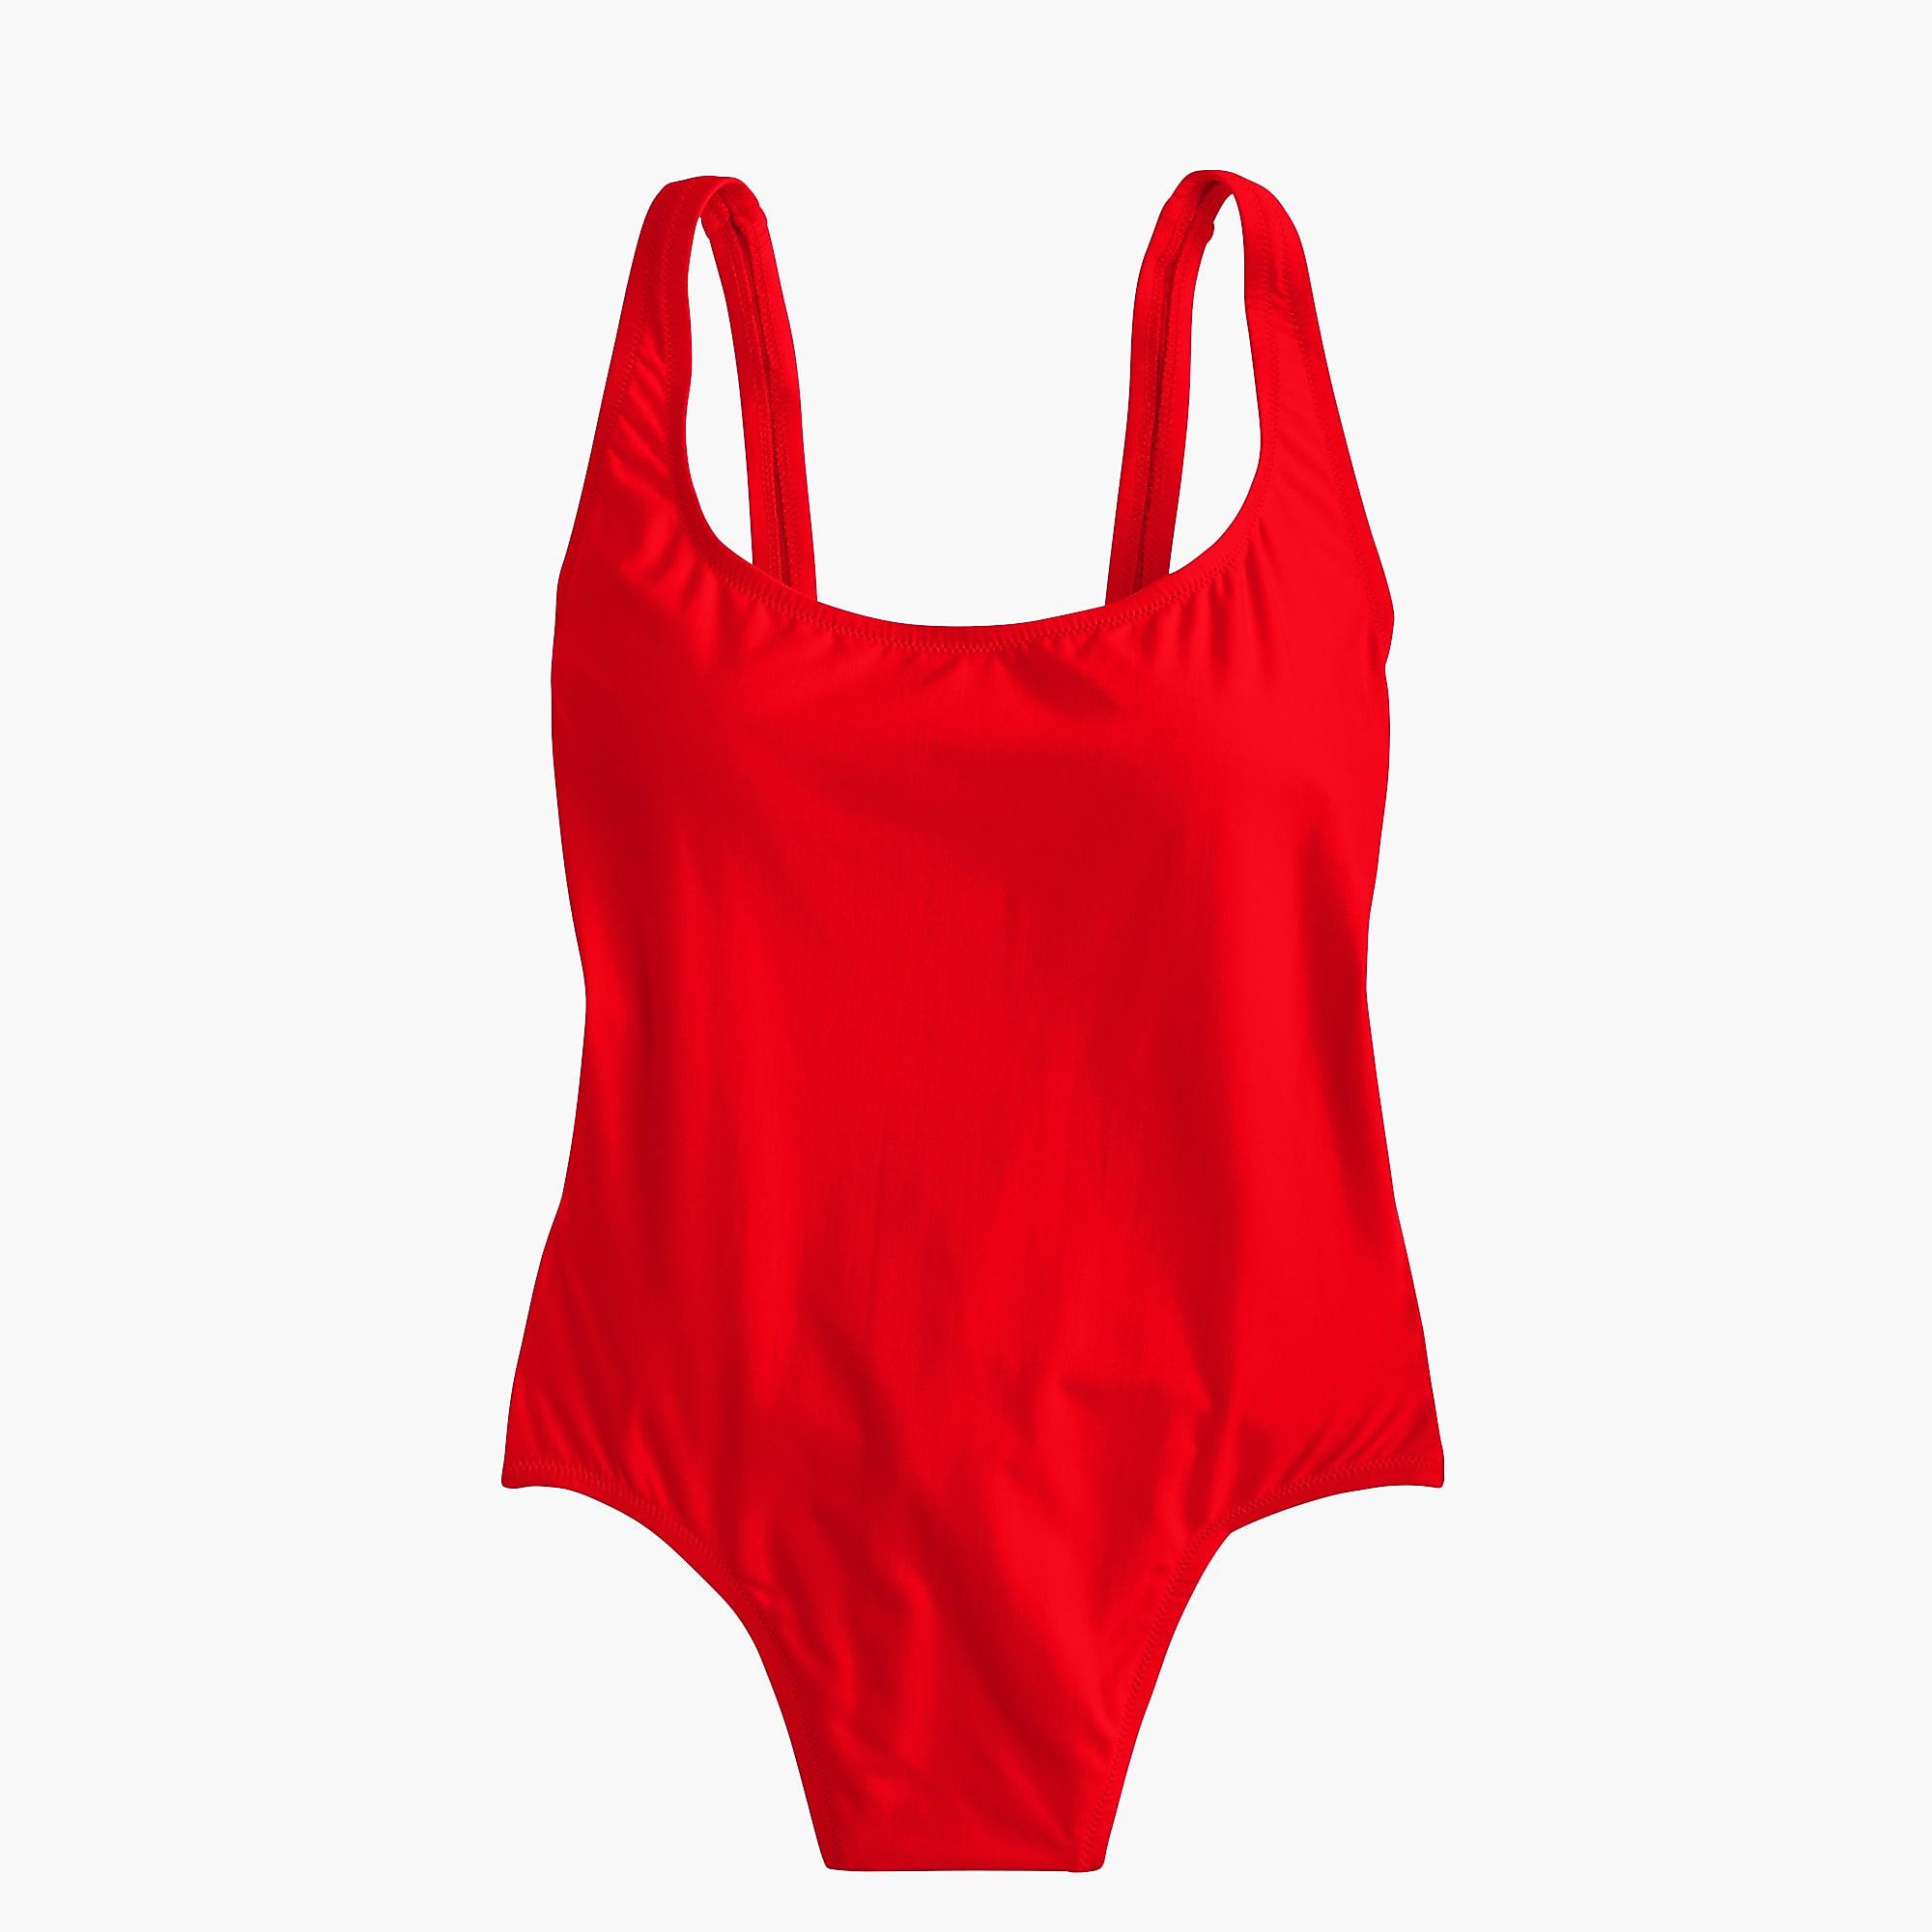 J.Crew Synthetic Plunging Scoopback One-piece Swimsuit in Bright Cerise ...